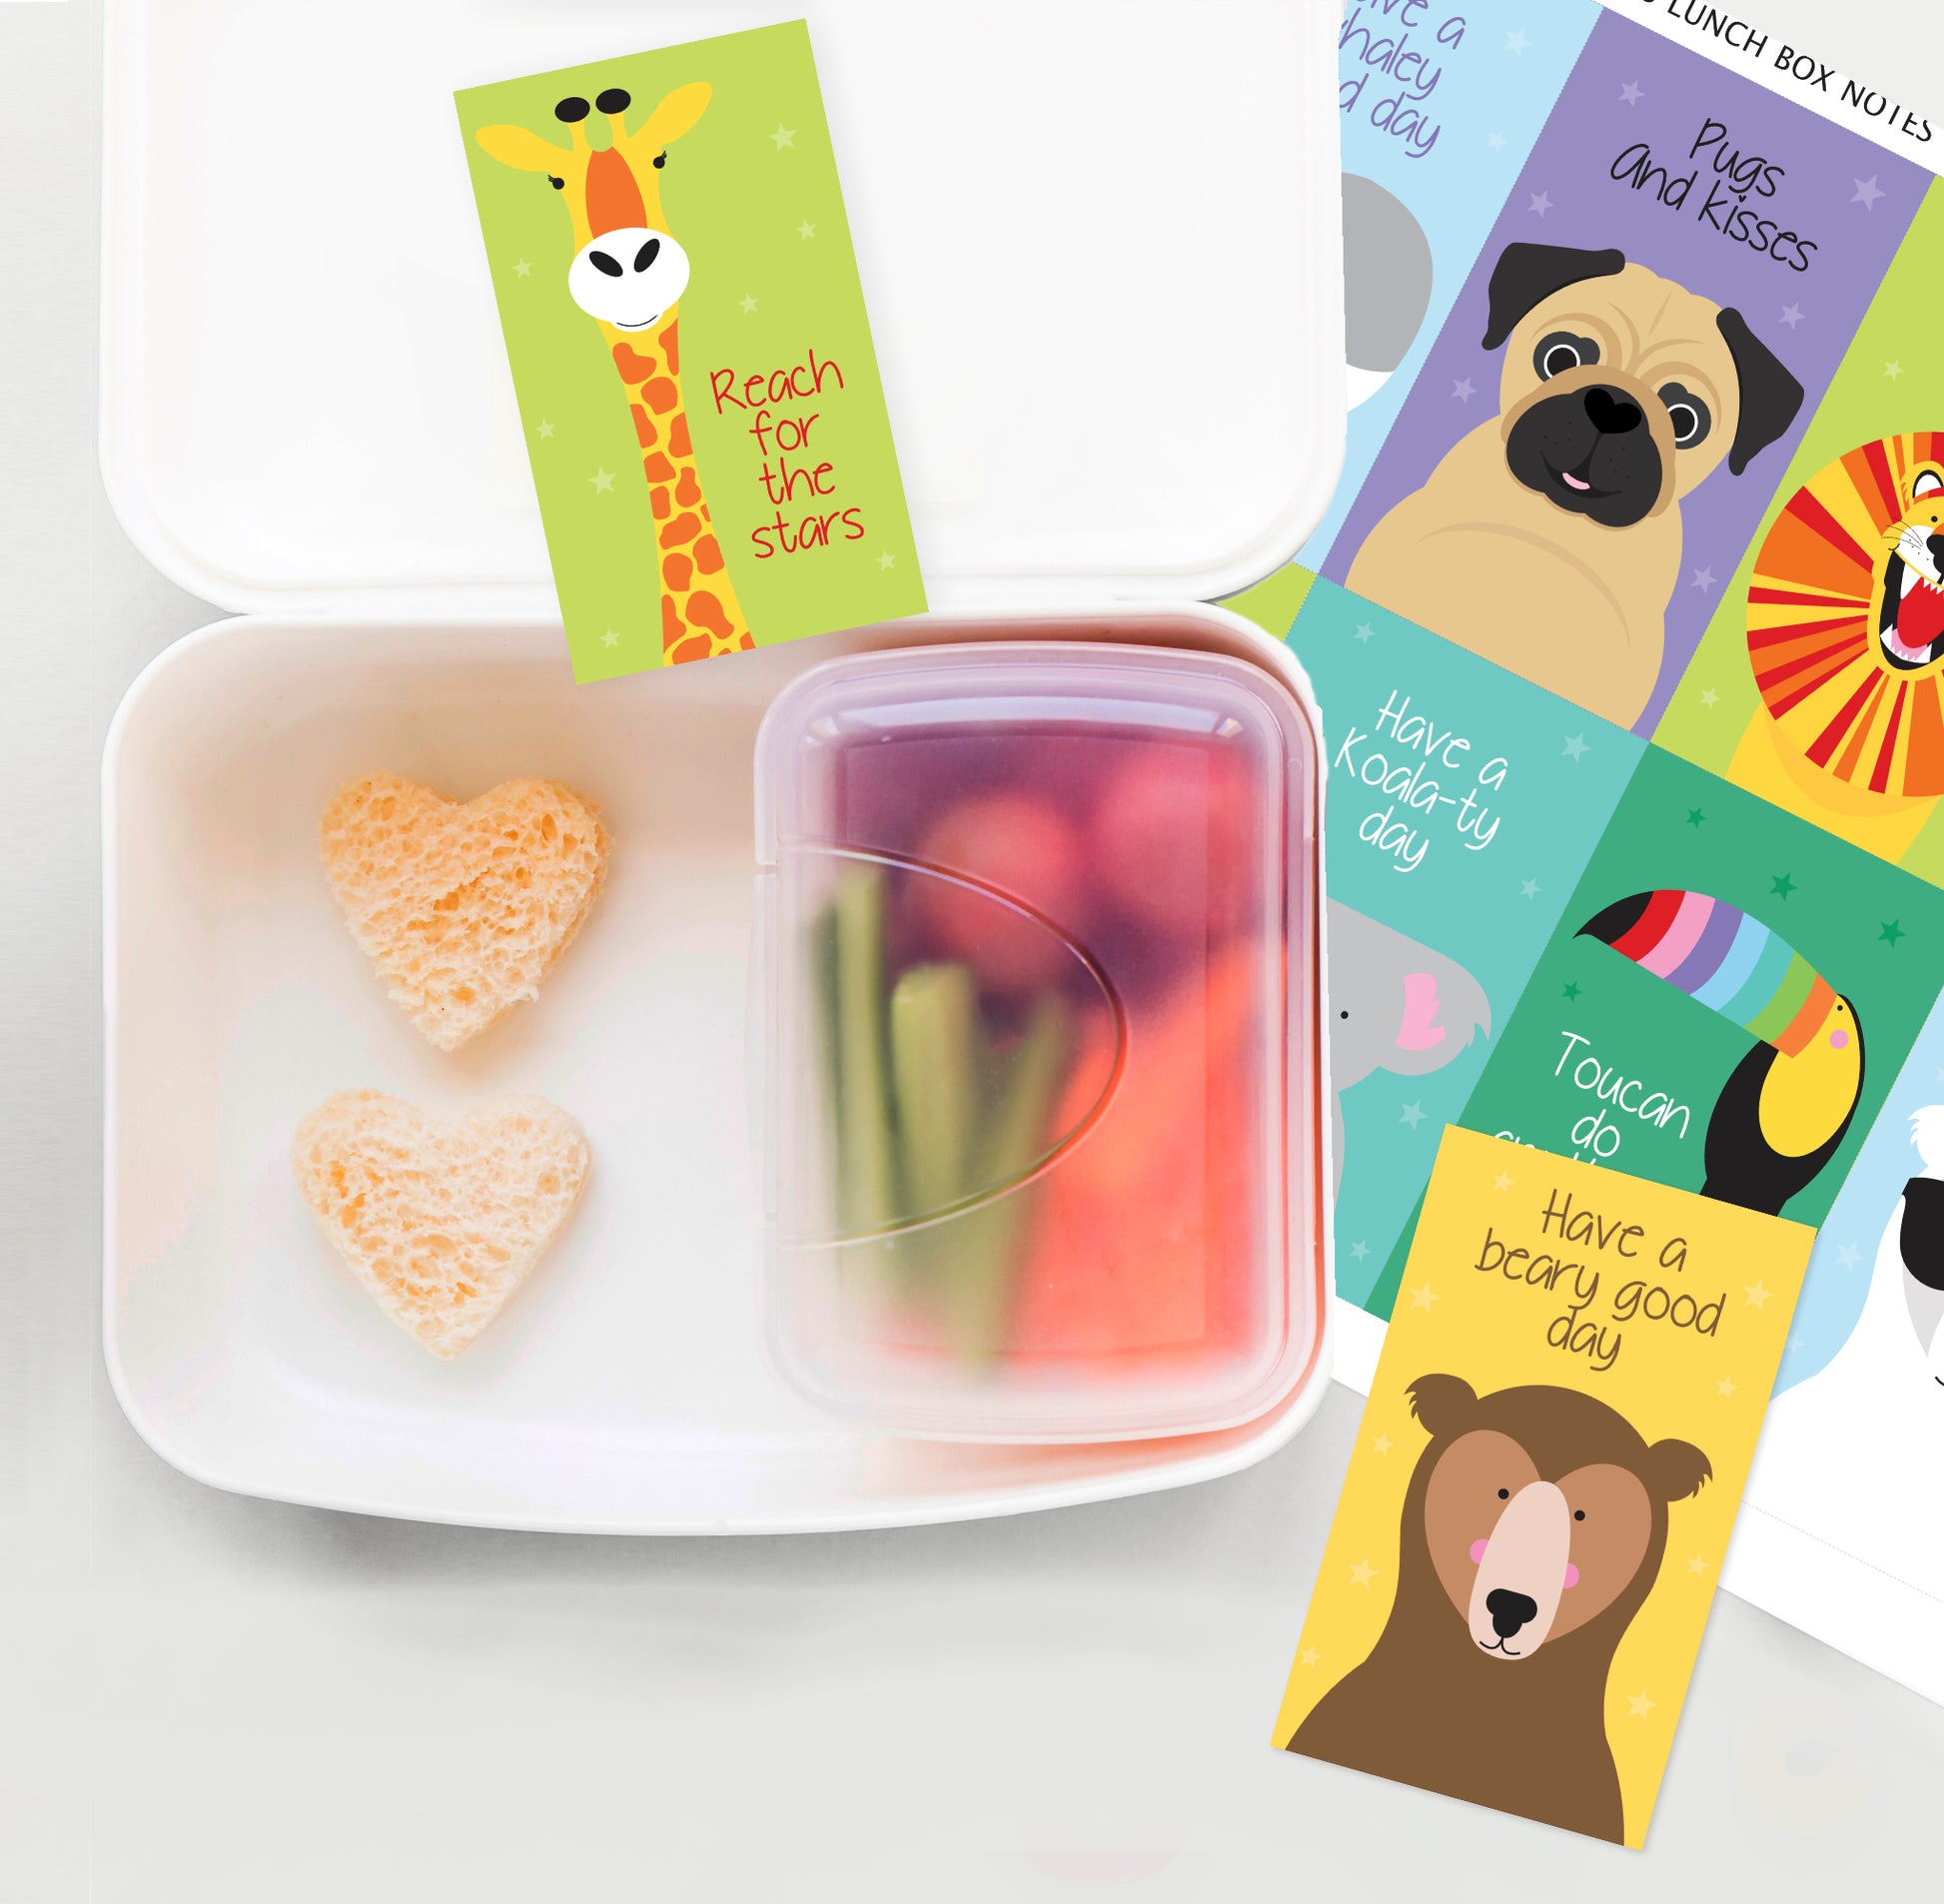 cute little lunch box notes for kids with positive messages and cute animal illustrations scattered around a lunch box